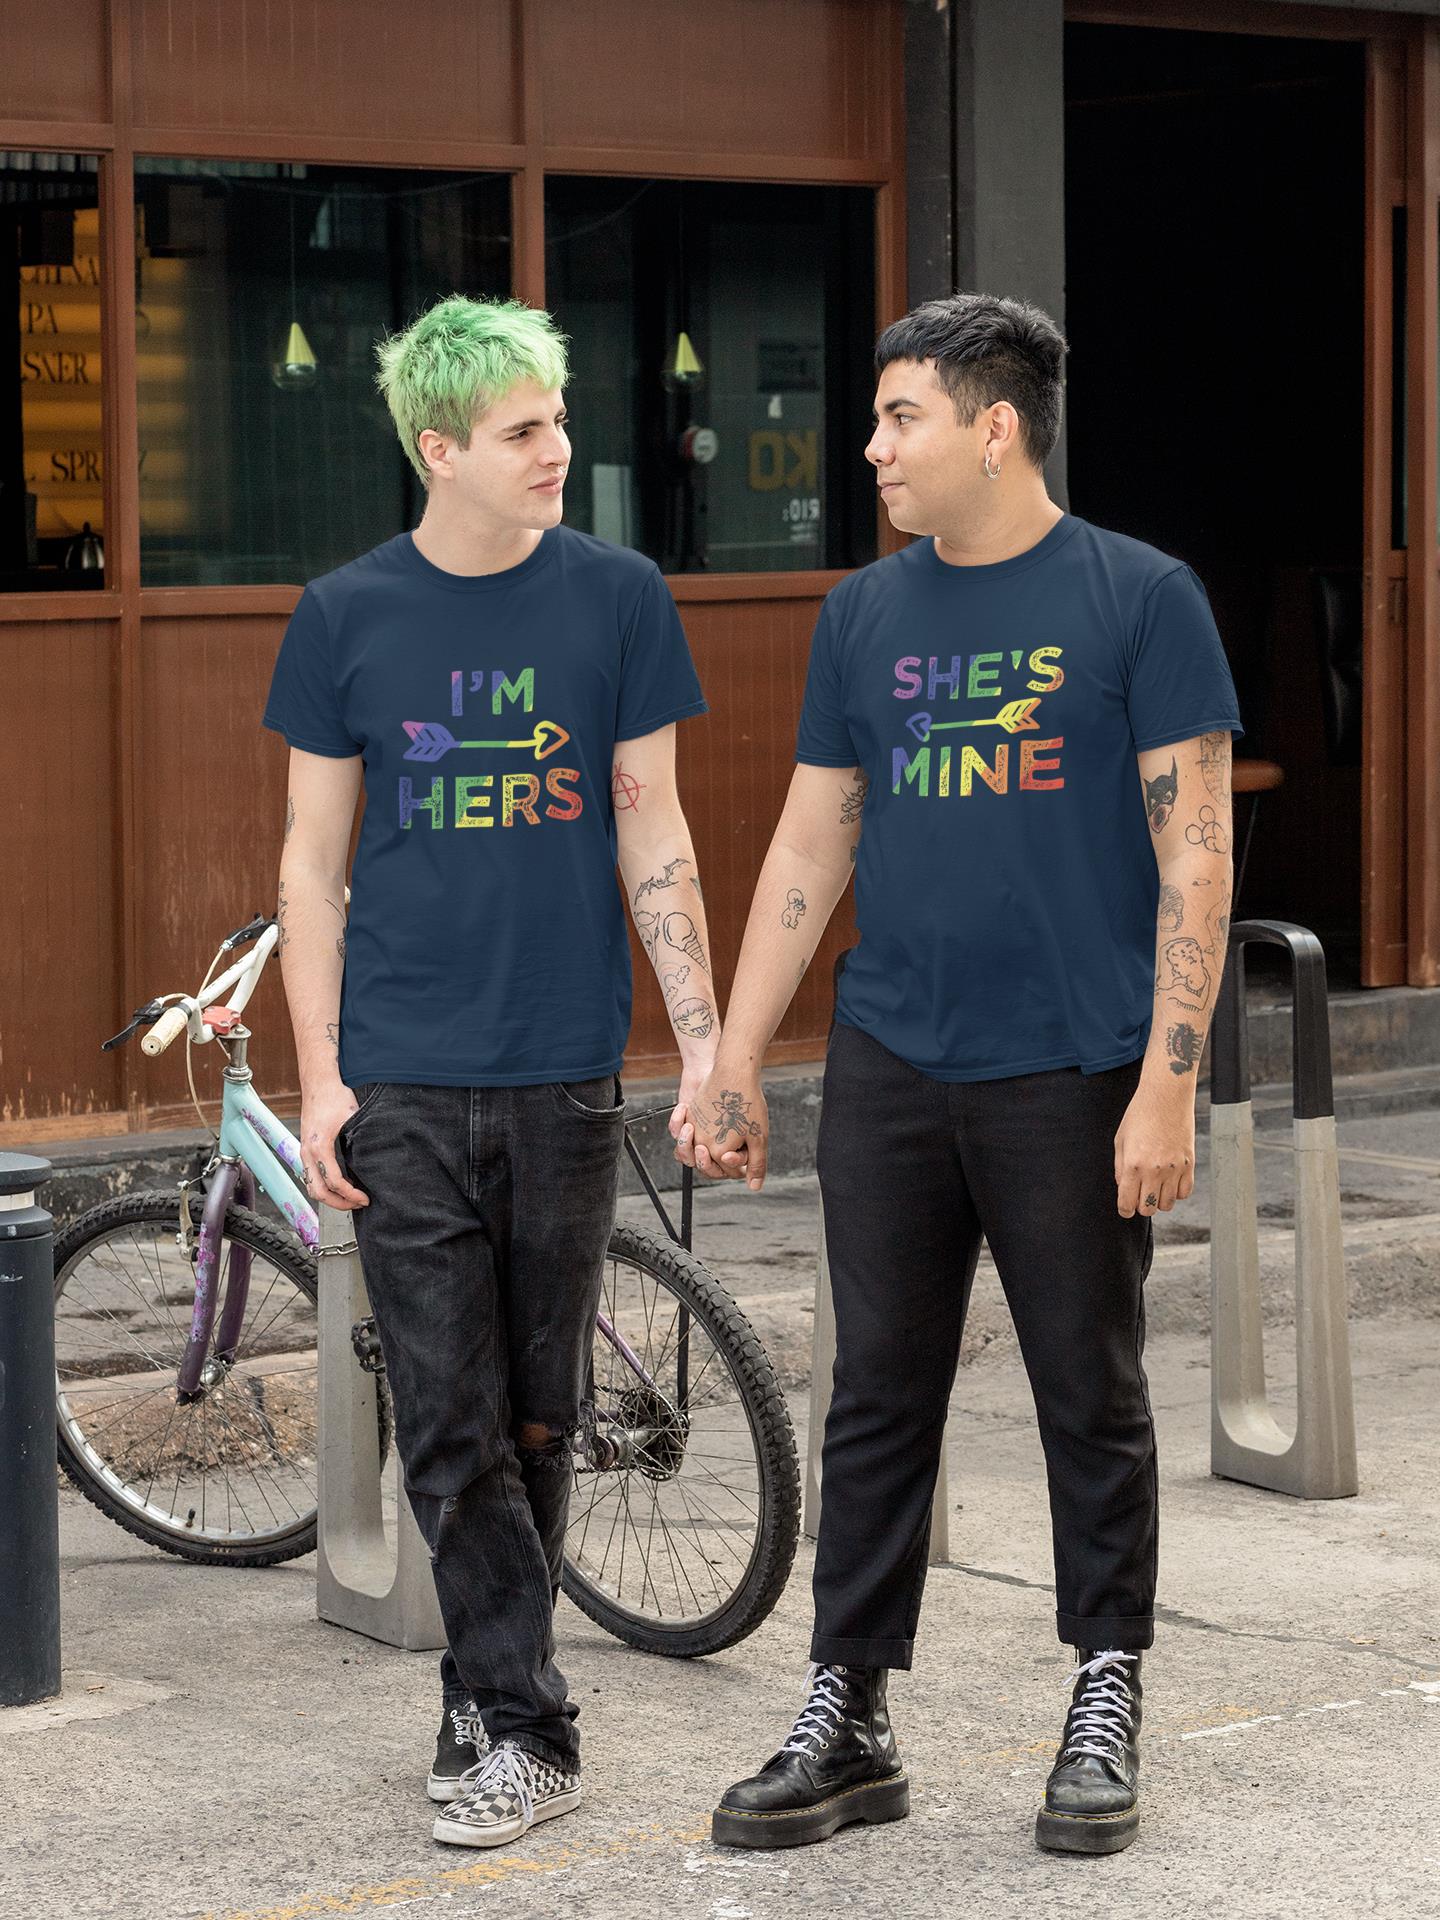 She?s Mine I?m In Her Matching LGBT Pride Gift T-Shirt